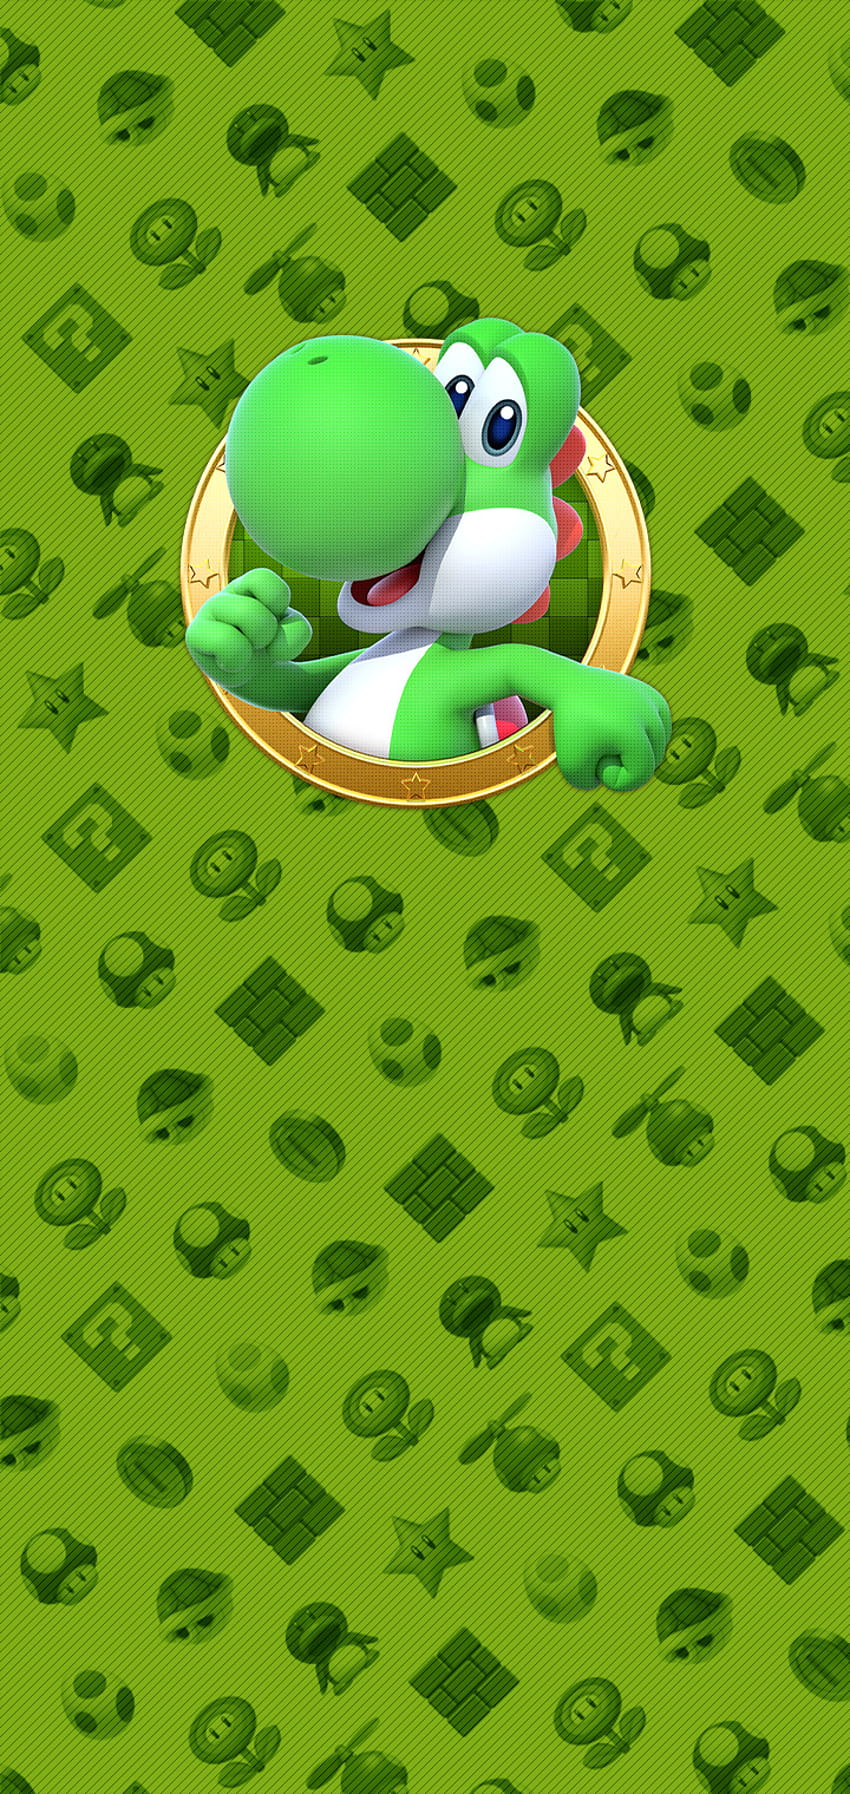 Yoshis Moon on Twitter Enjoy this new Yoshis Crafted World wallpaper  made by Yoshis Moon There are 4 sizes  mobile computer tablet or  Facebook cover photo httpstcoN9IOM3K7ba  Twitter